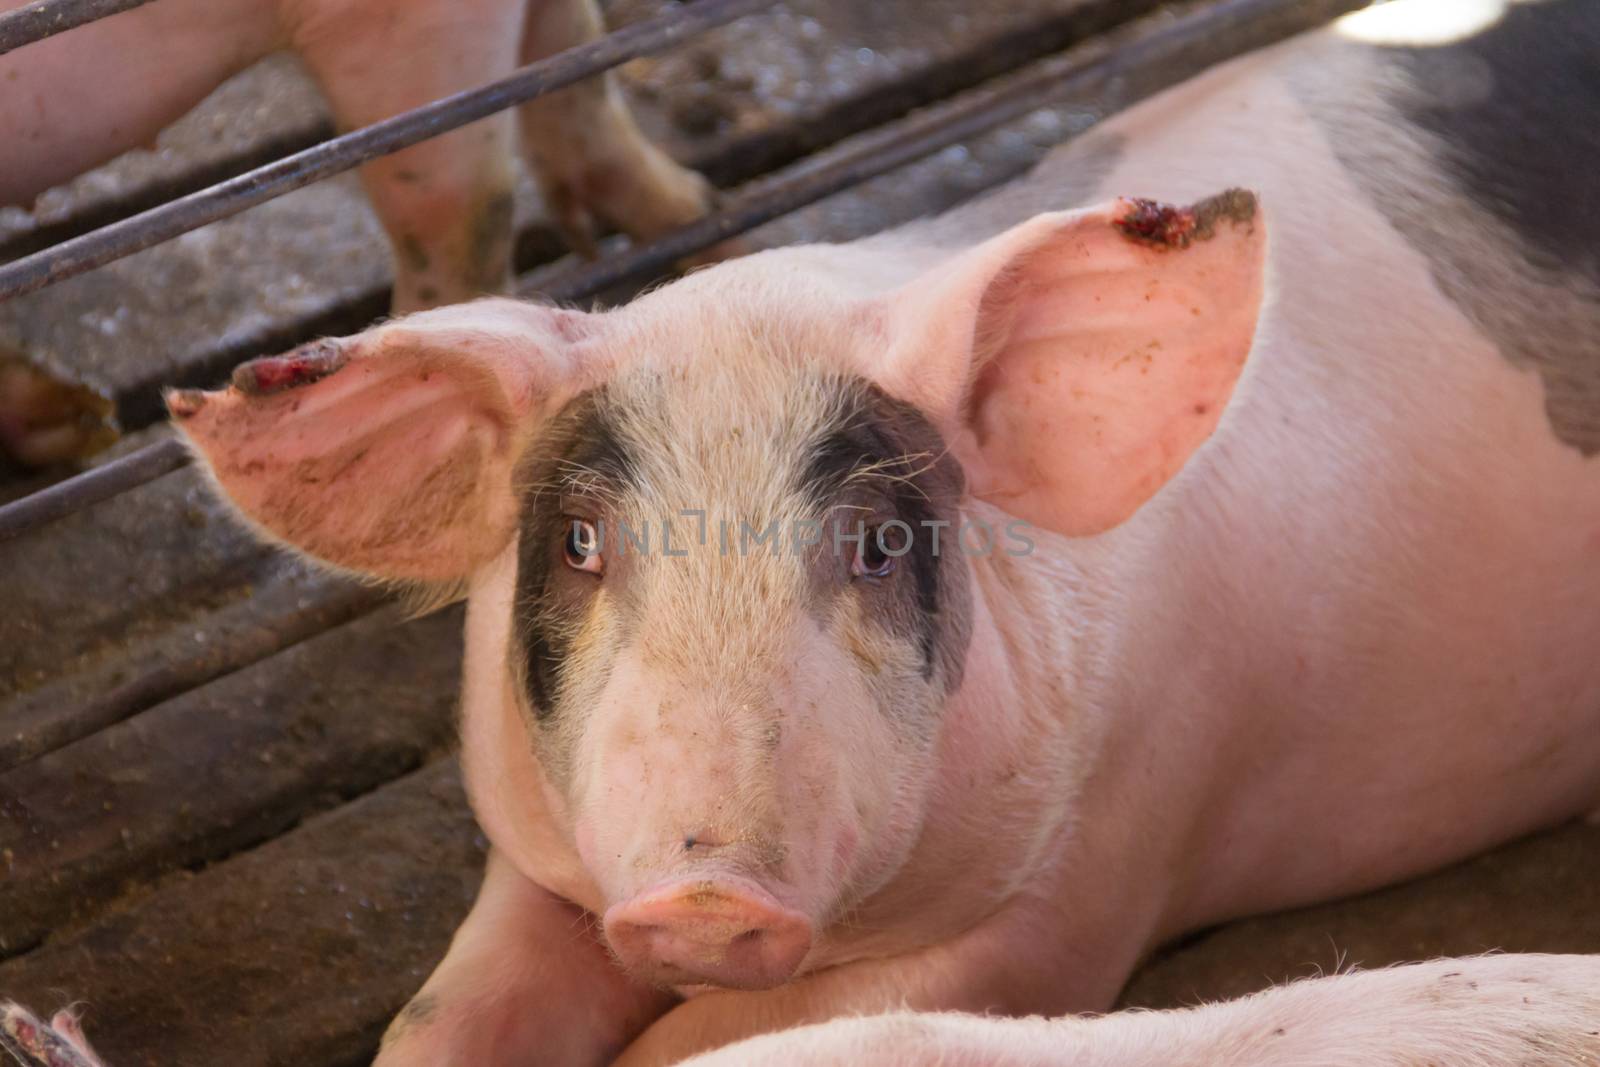 industrial pigs hatchery to consume its meat